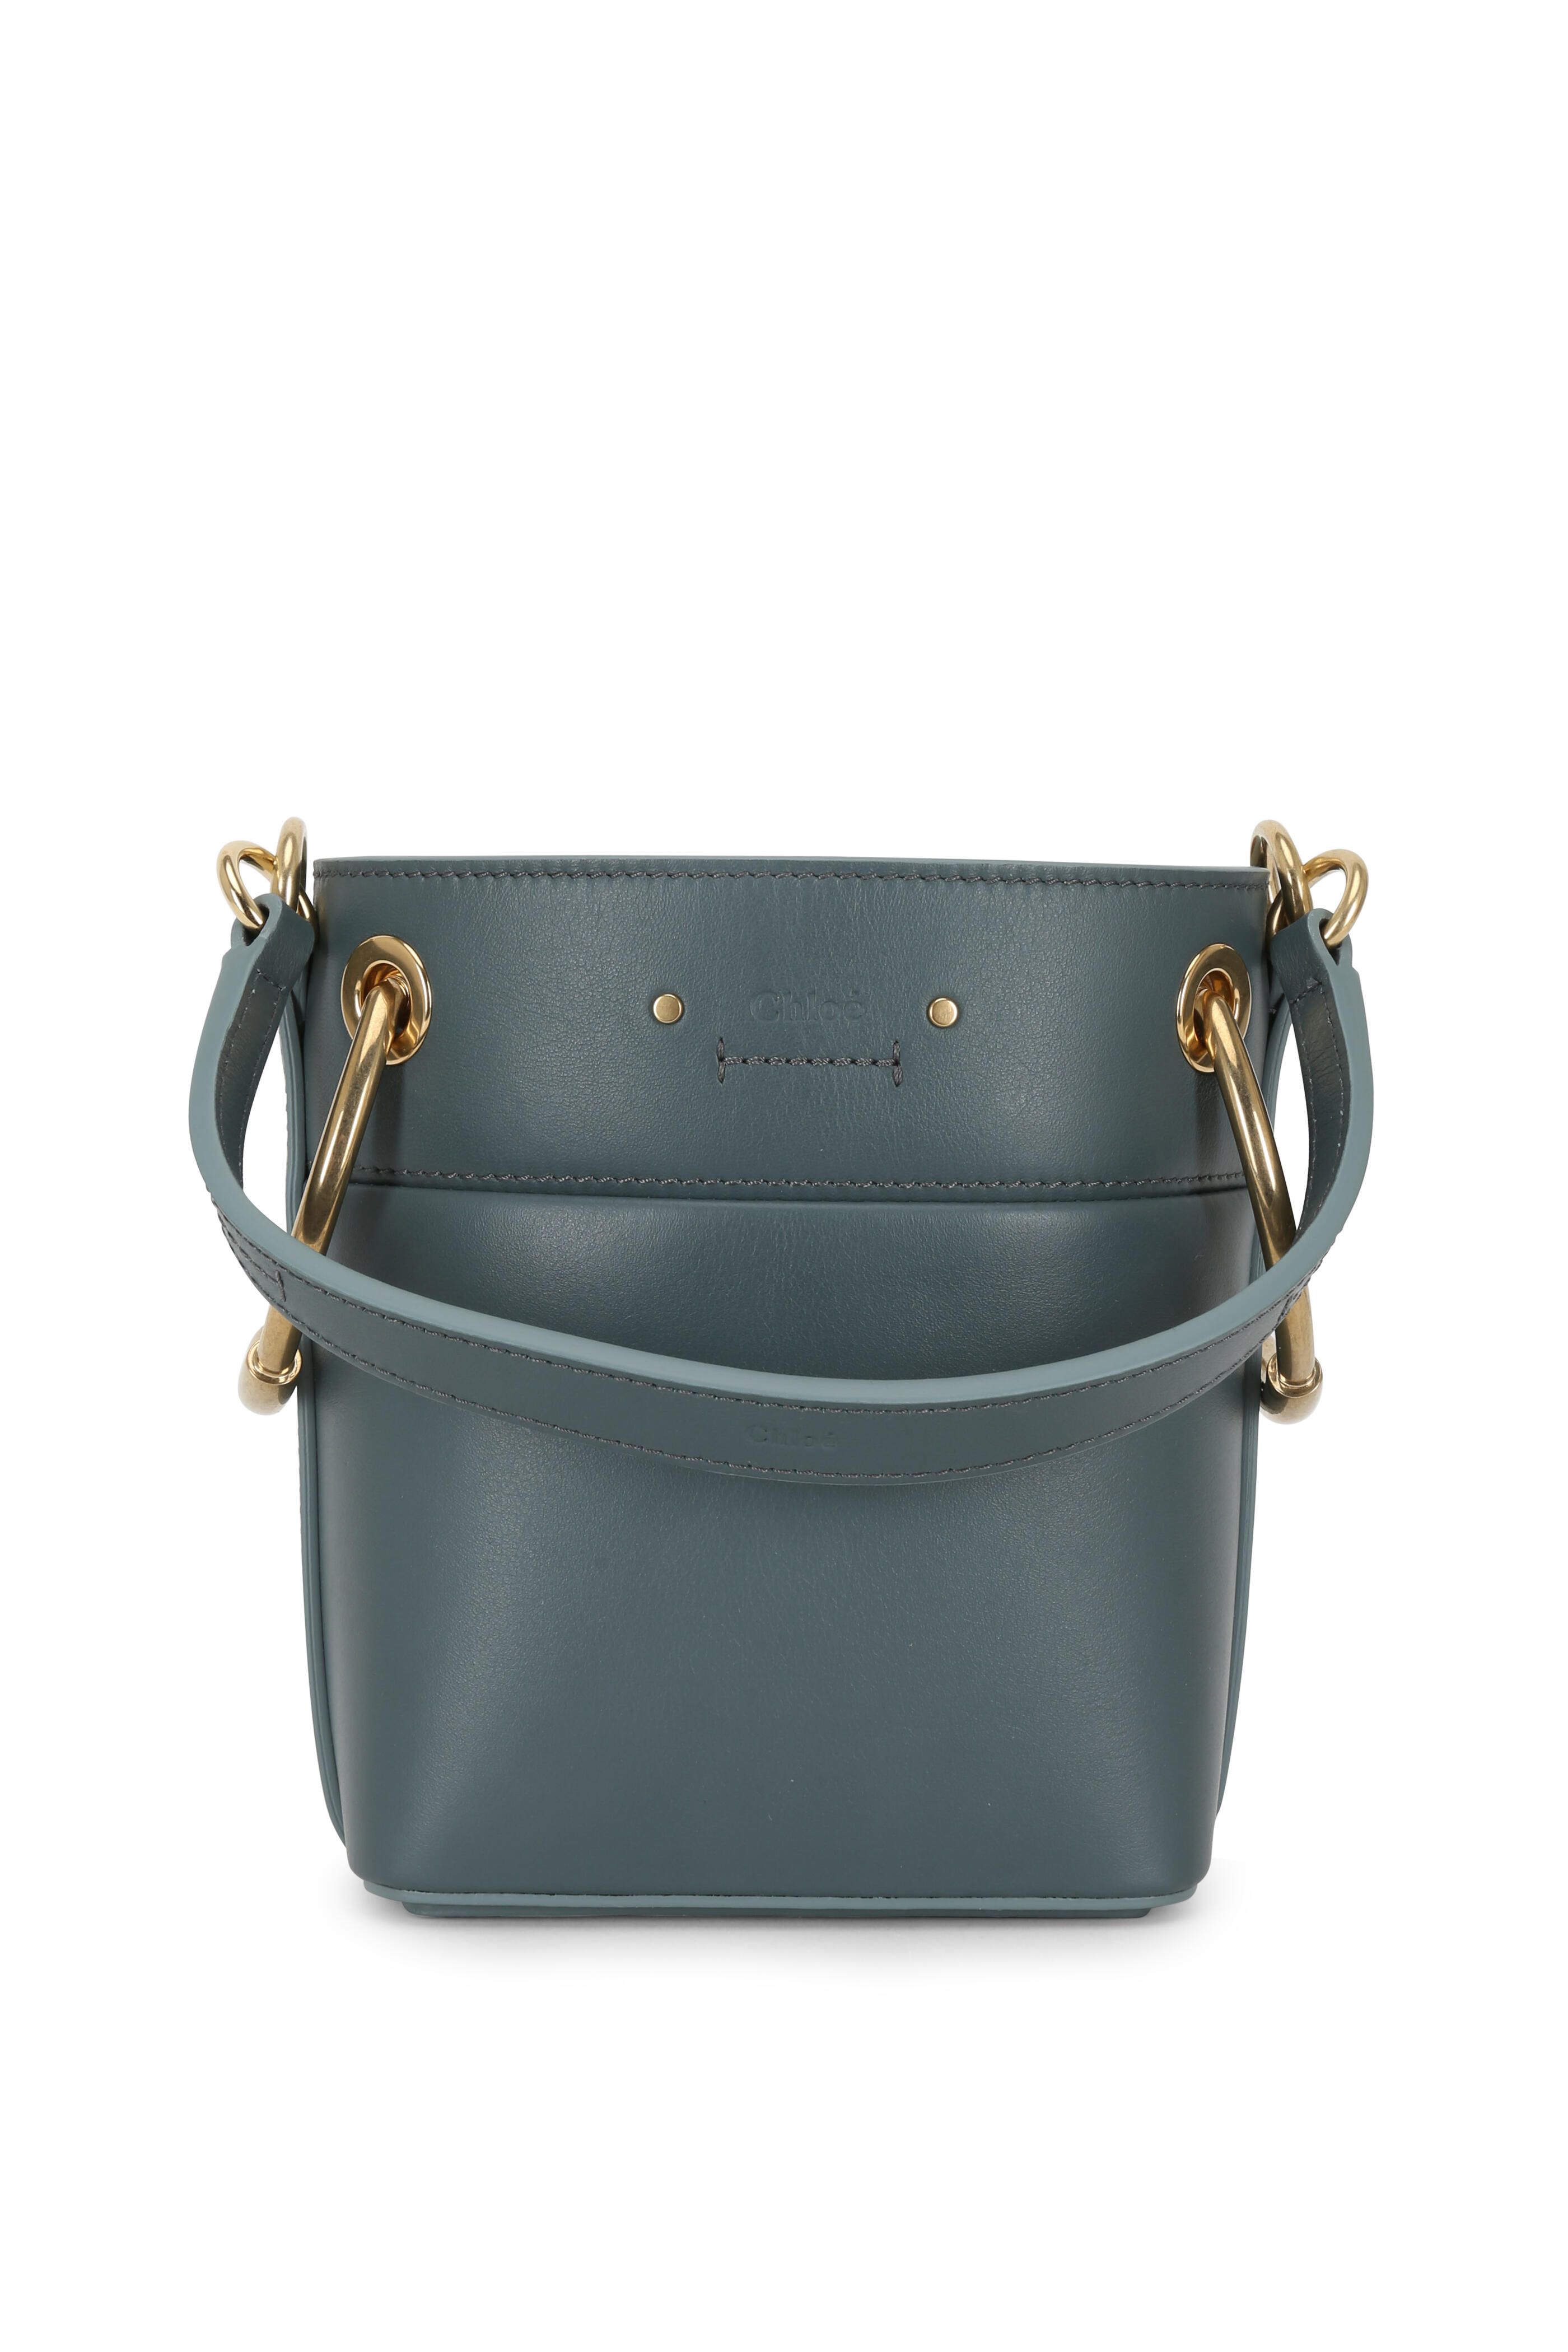 Chloé - Roy Cloudy Blue Leather Mini Bucket Bag | Mitchell Stores